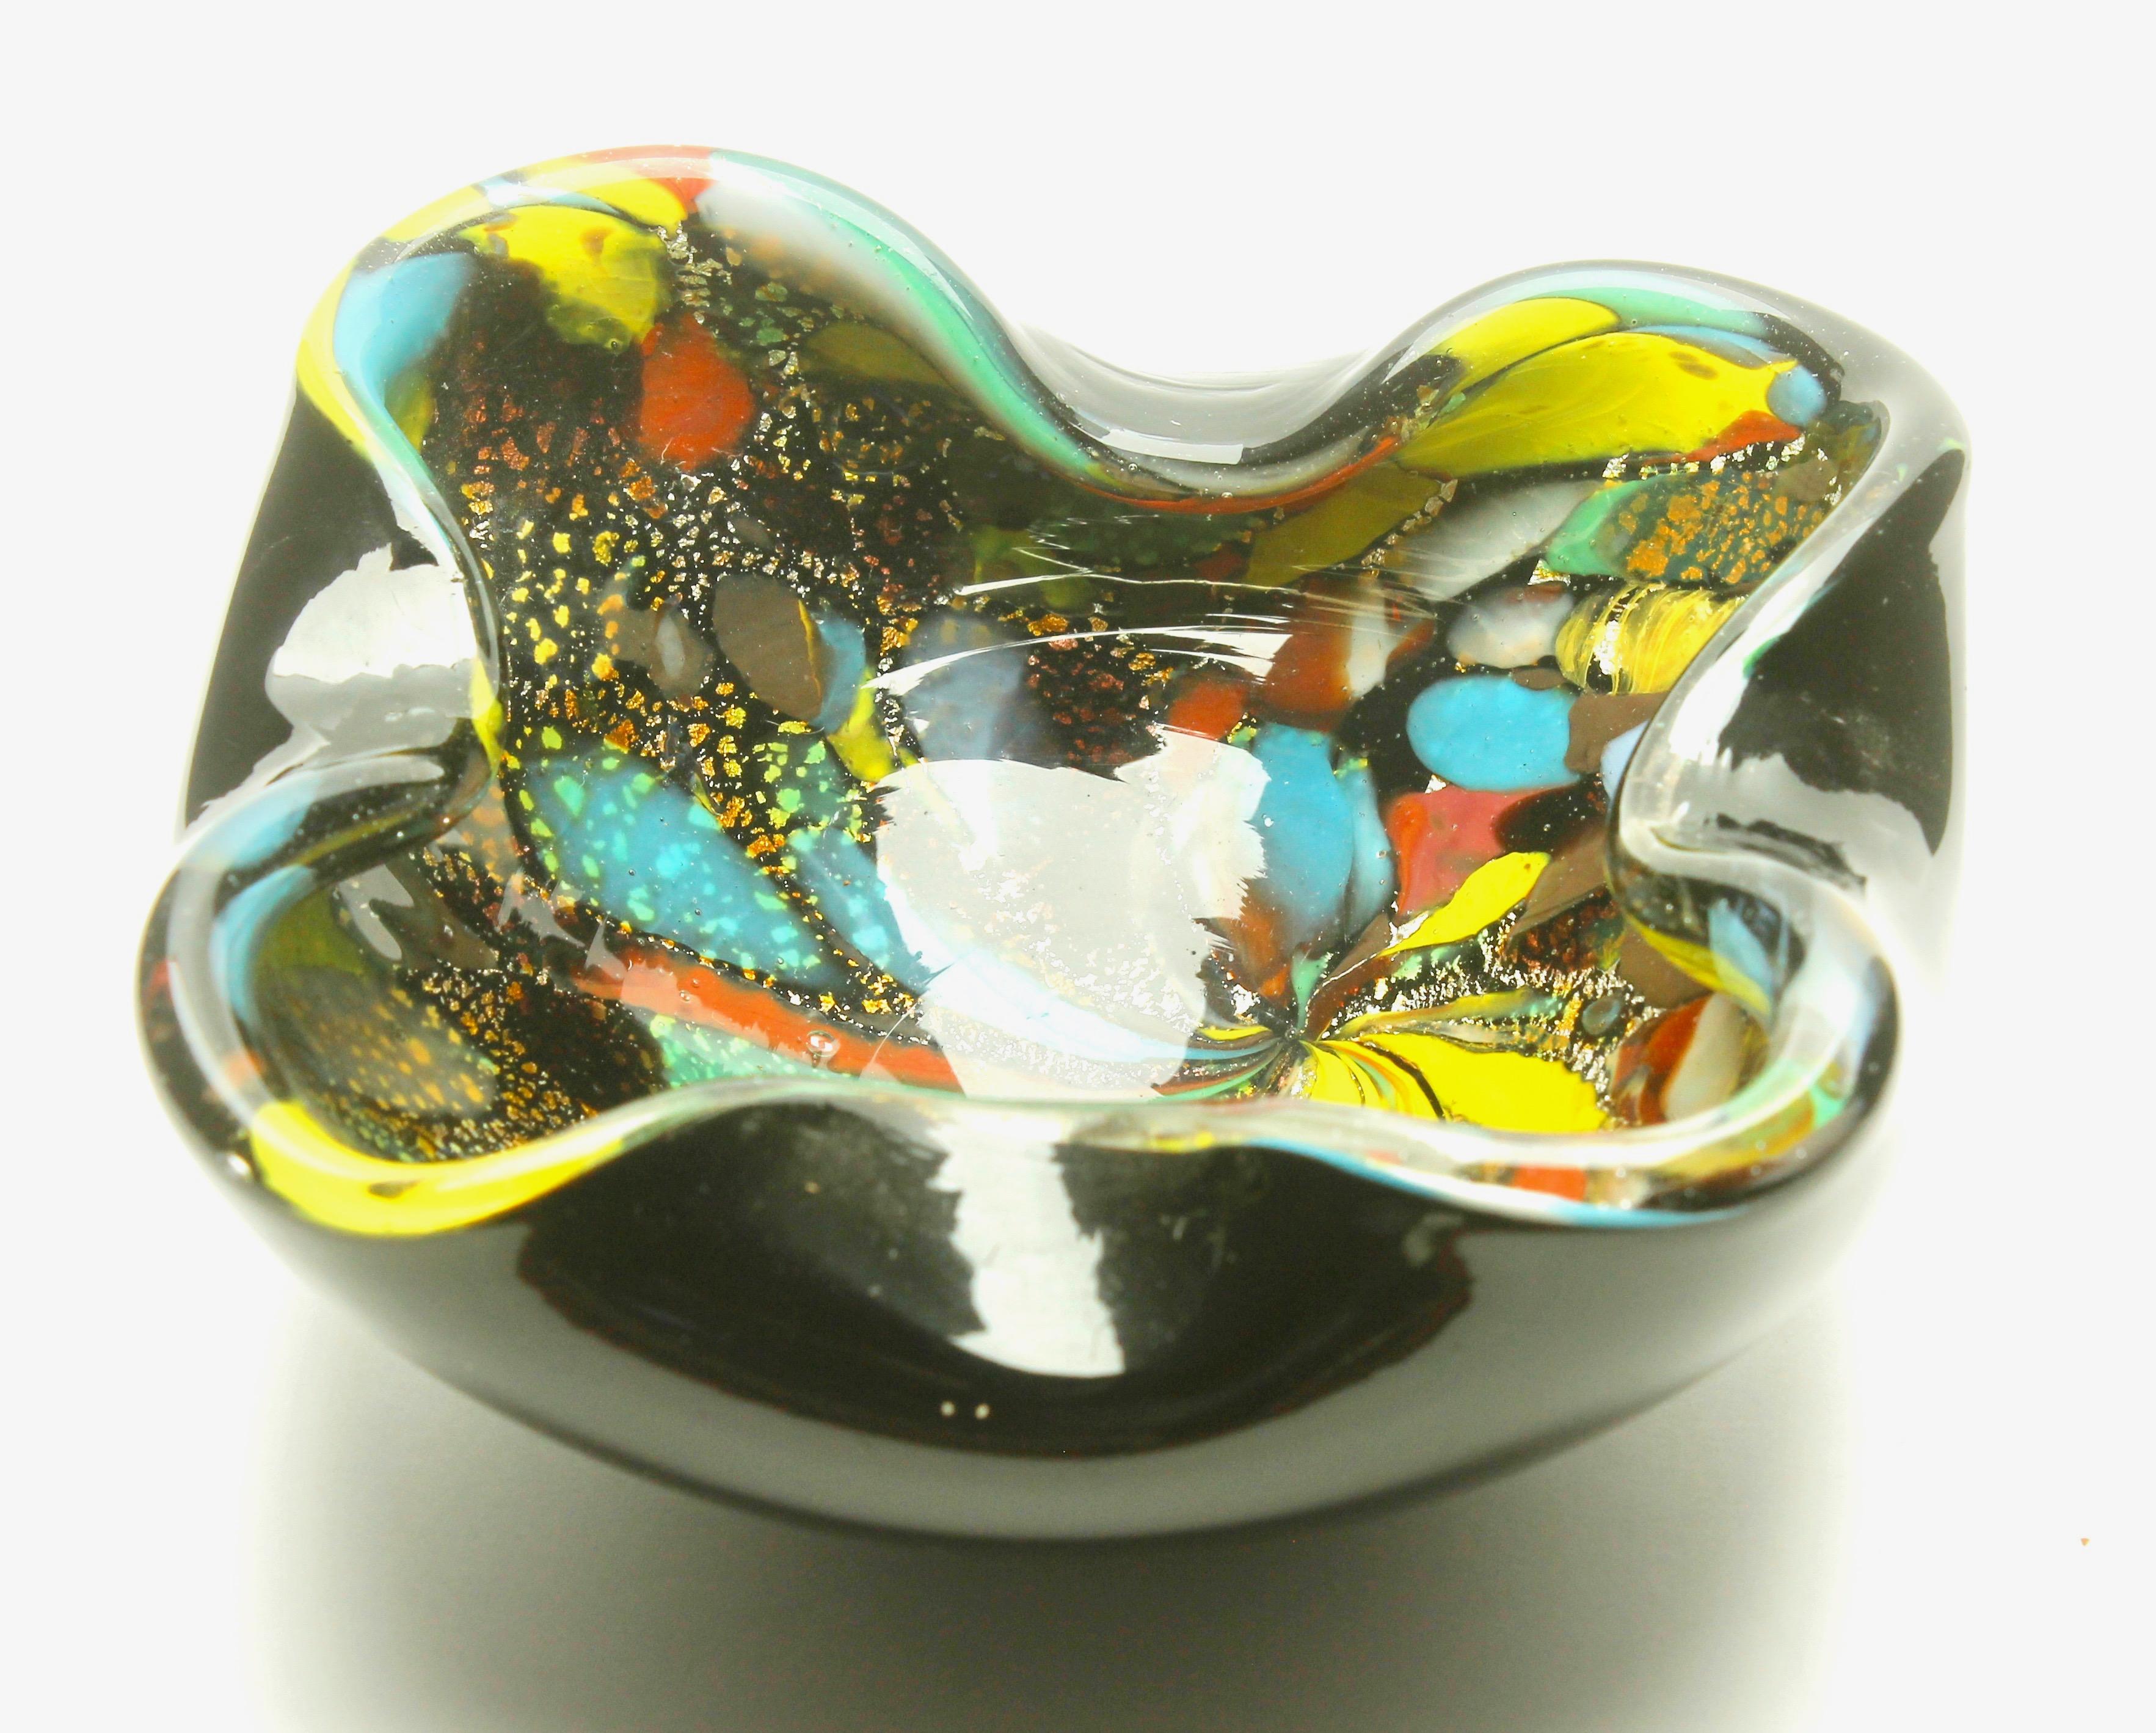 Hand-Crafted Murano Art Glass Bowl Black Shell, Metals and Bright Colors, Attributed to AVEM